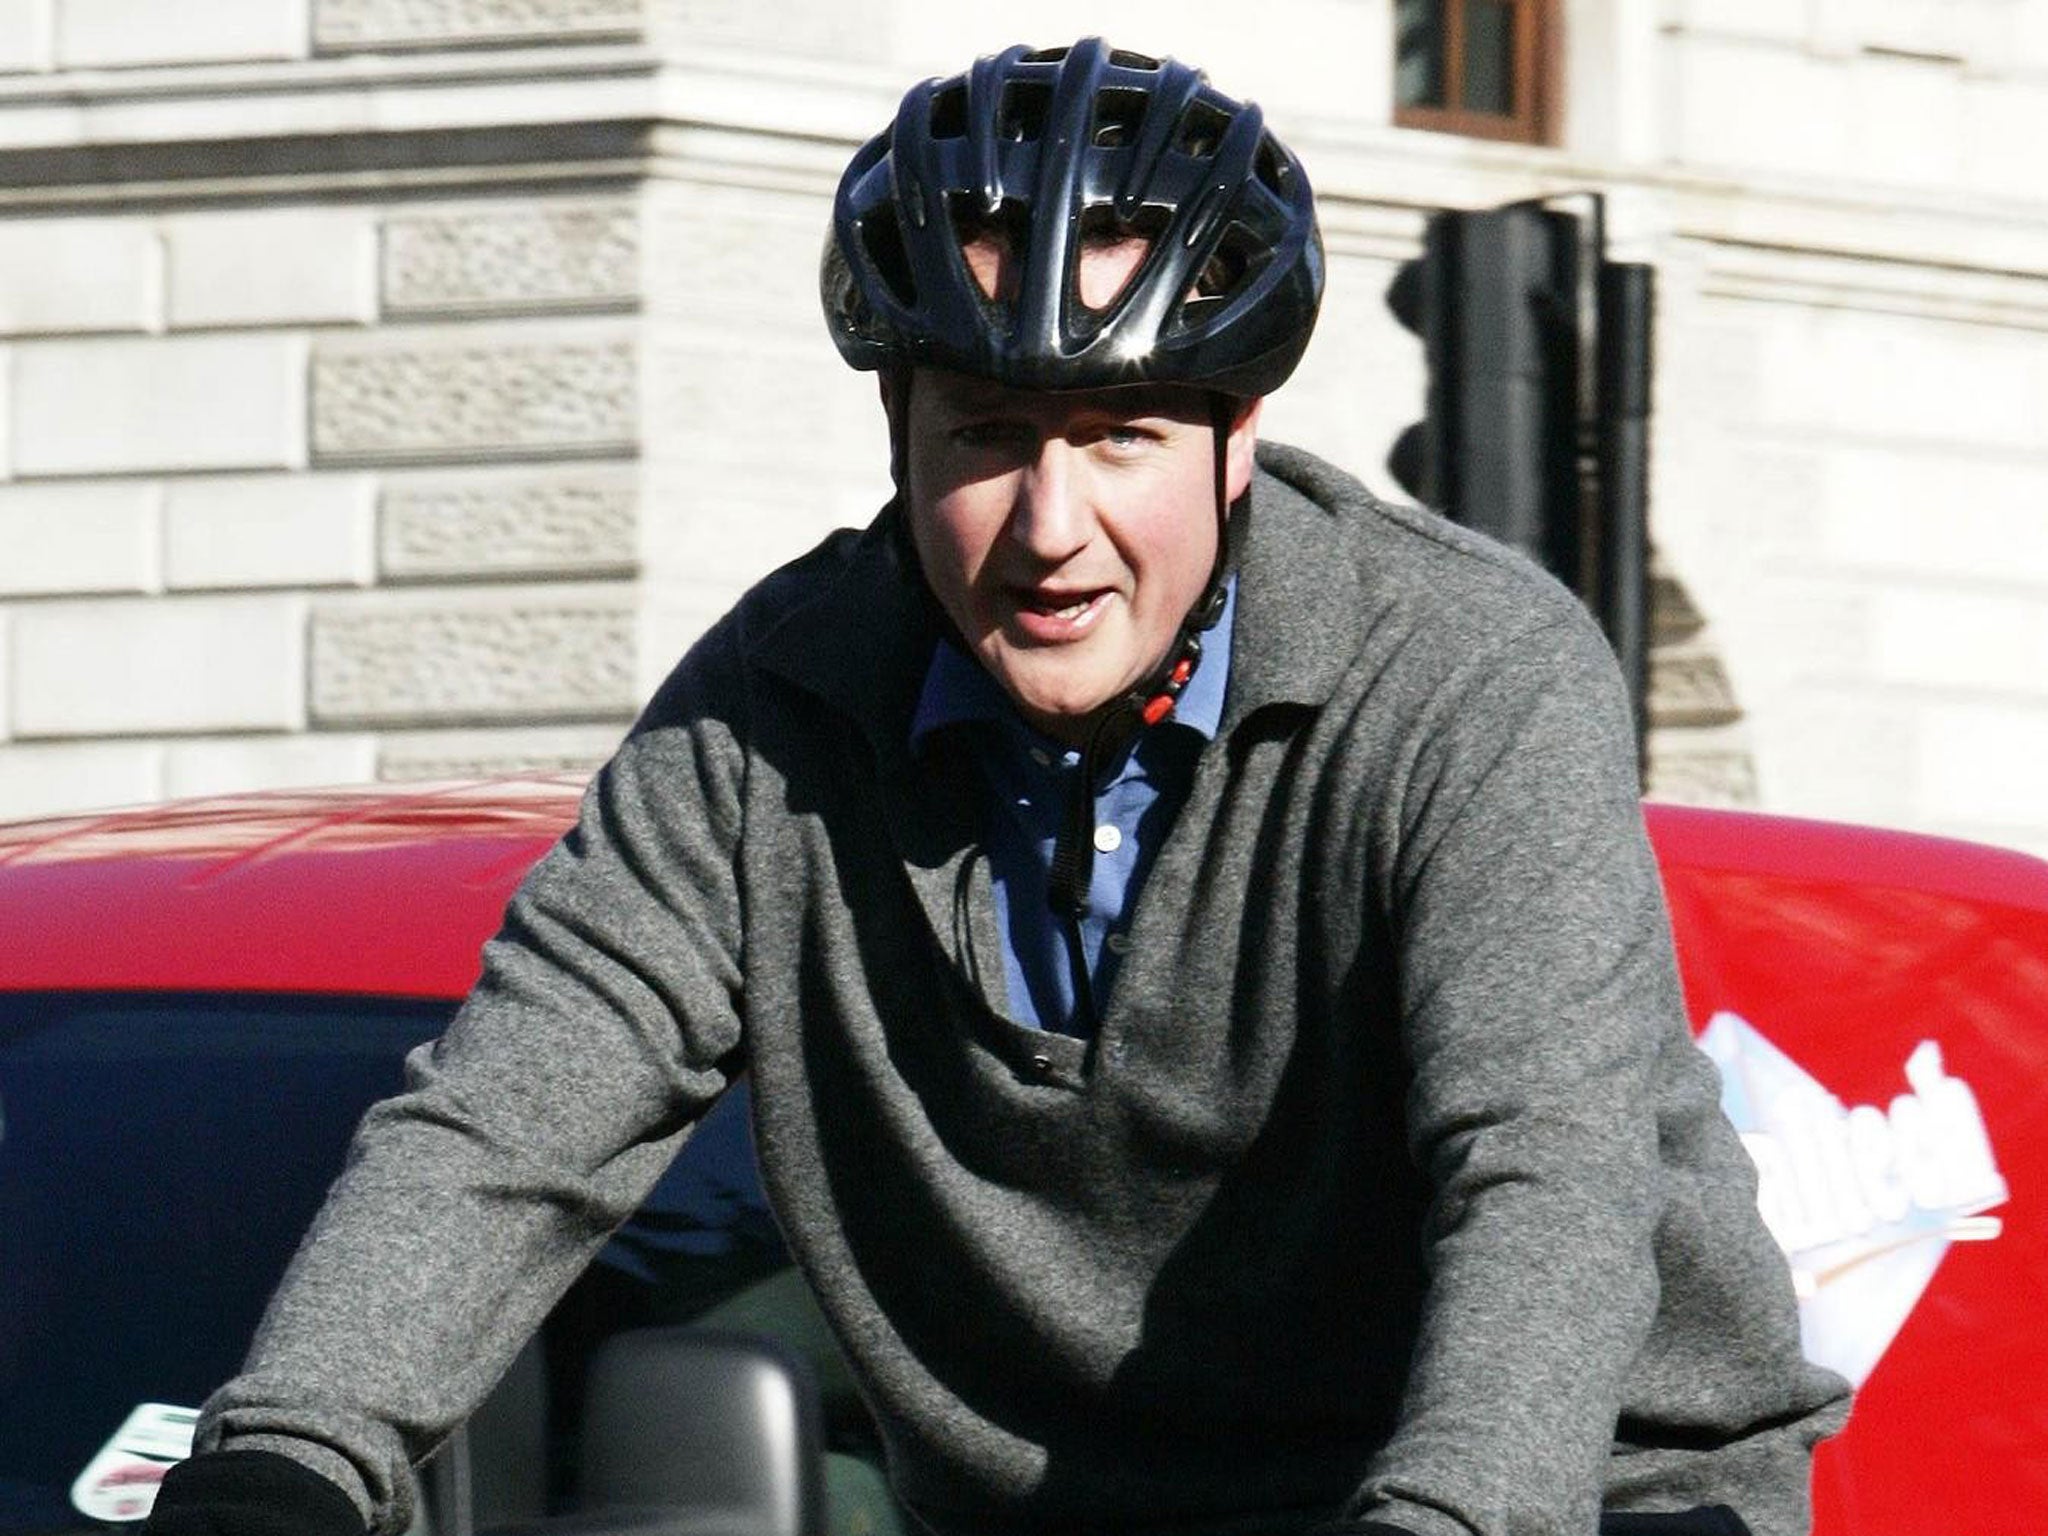 Two wheels good: Cameron used to cycle to work, but it didn’t last